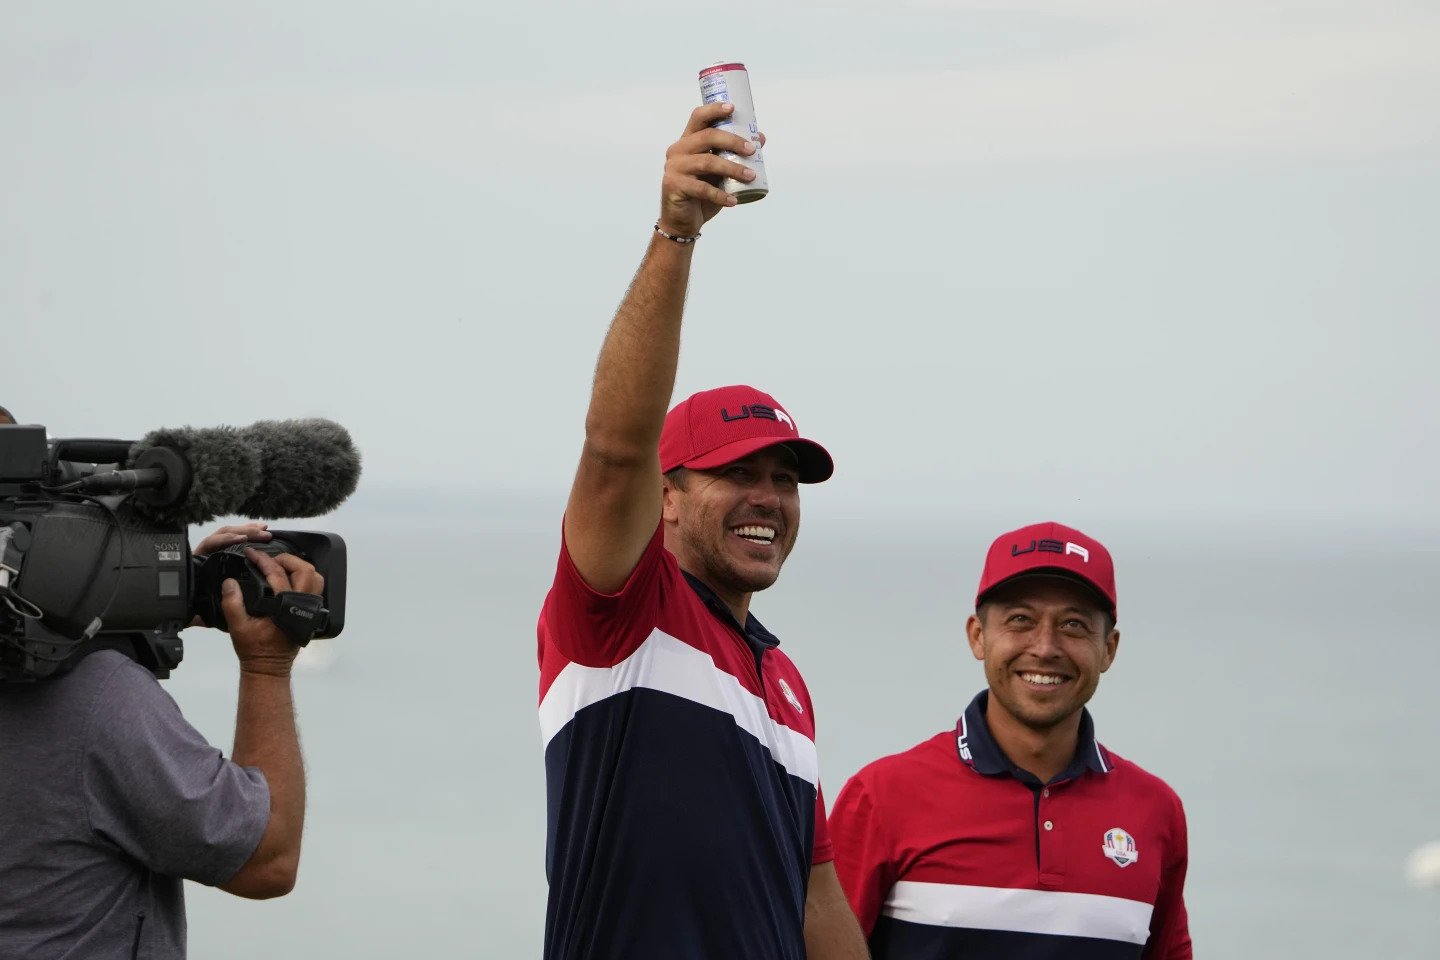 RYDER CUP 23 The exhibition is now golfs biggest spectacle Loop Trinidad and Tobago